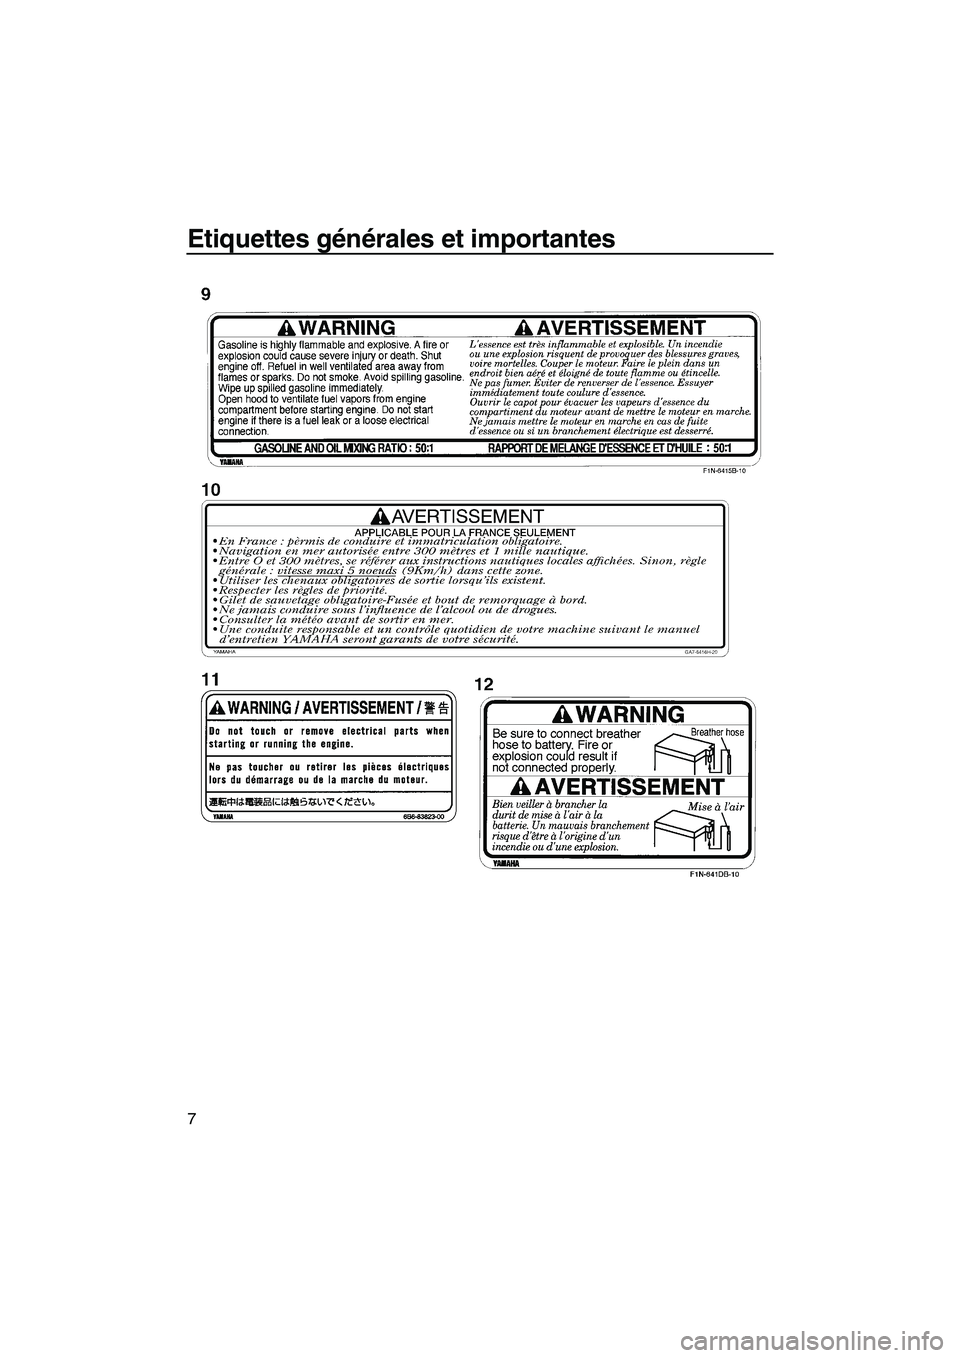 YAMAHA SUPERJET 2007  Notices Demploi (in French) Etiquettes générales et importantes
7
UF1N75F0.book  Page 7  Tuesday, May 16, 2006  9:19 AM 